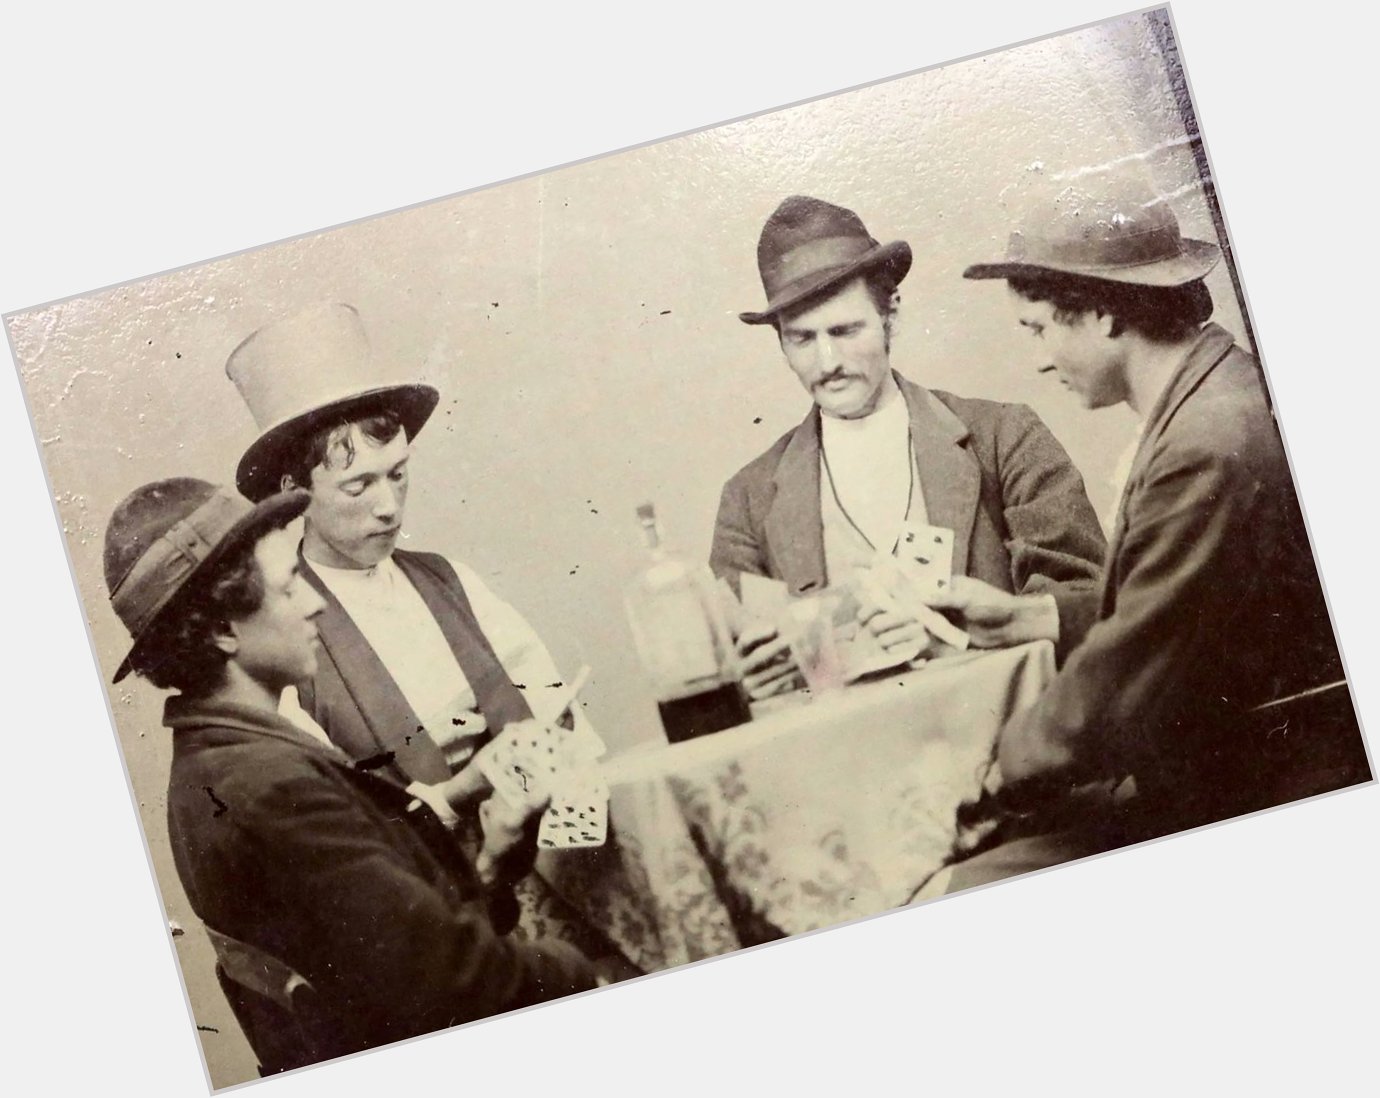 Happy Birthday to Billy the Kid (second from left.) One of the great American Bad-Asses! 